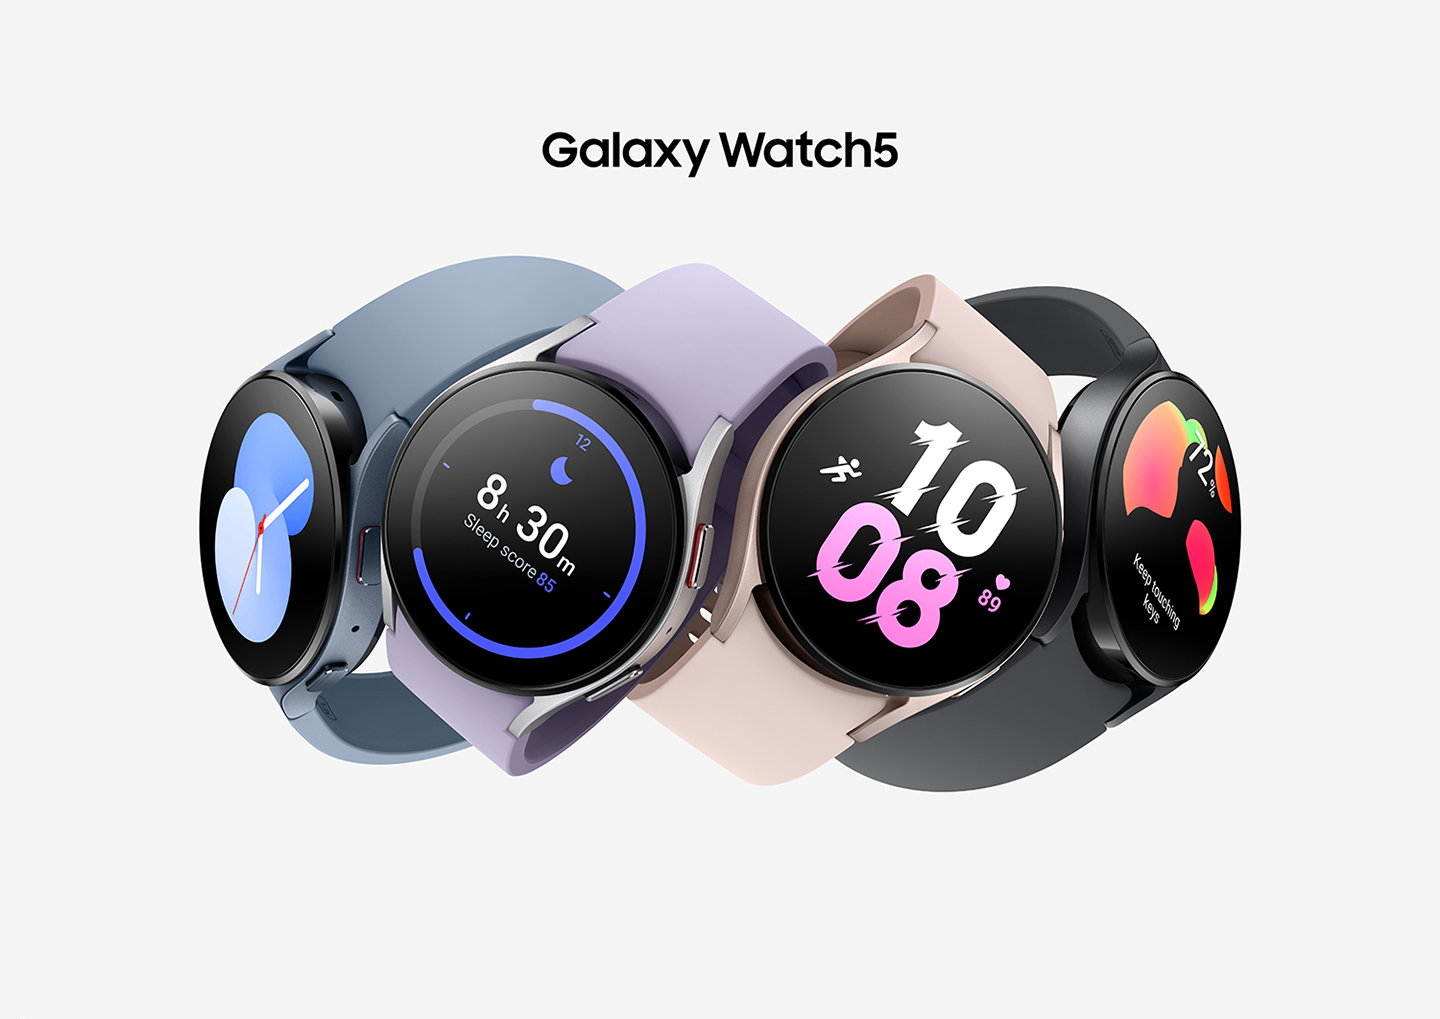 Galaxy Watch4 and Galaxy Watch4 Classic: Reshaping the Smartwatch